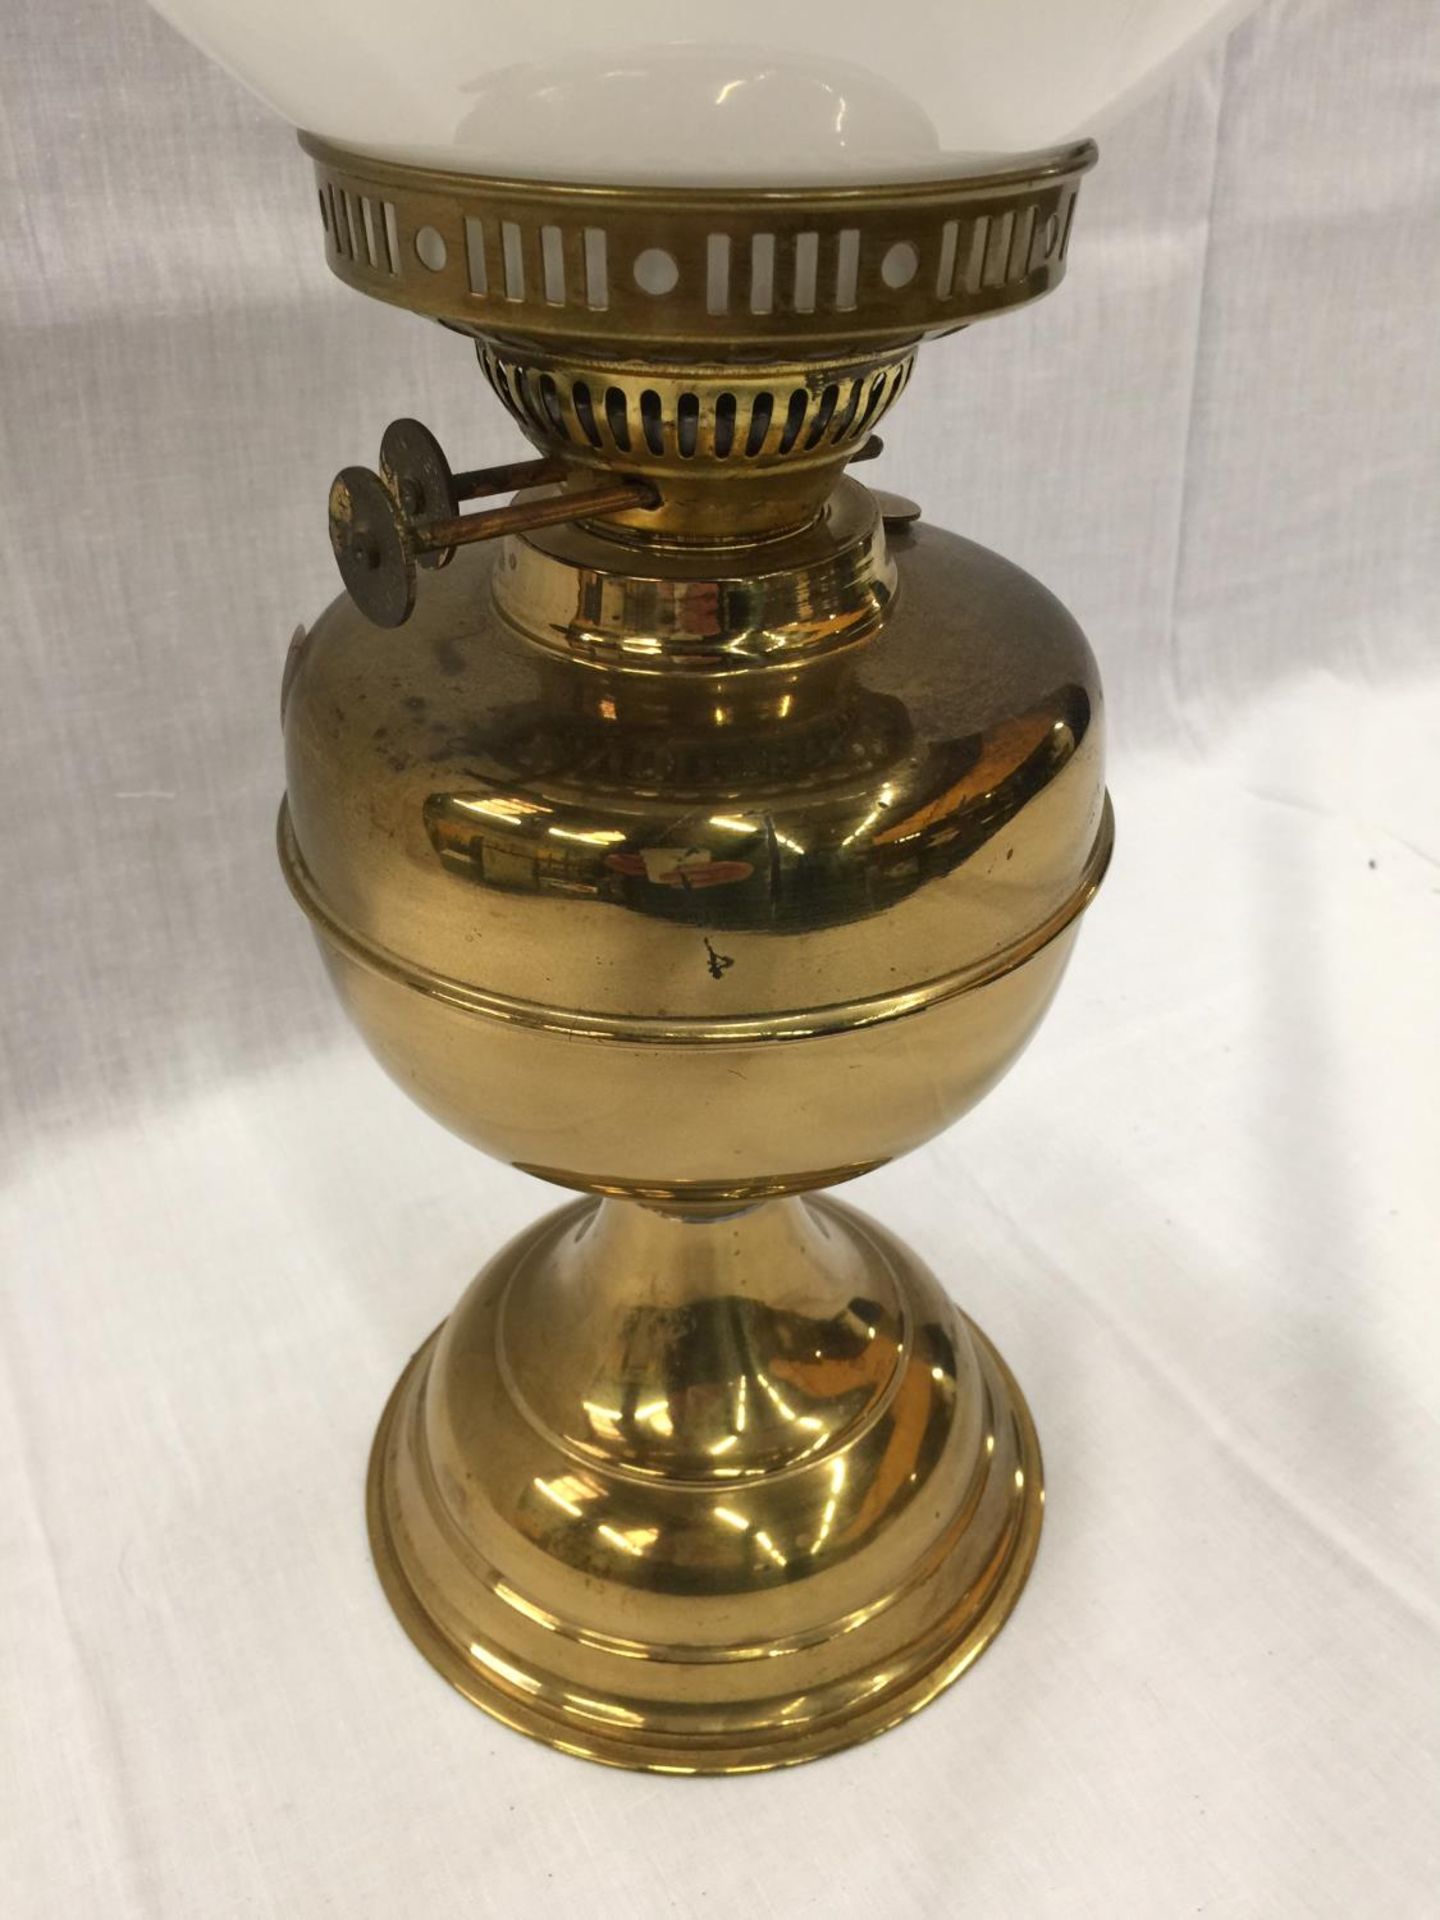 A HEAVY BRASS OIL LAMP WITH GLASS CHIMNEY AND MILK GLASS SHADE, HEIGHT APPROX 50CM - Image 3 of 4